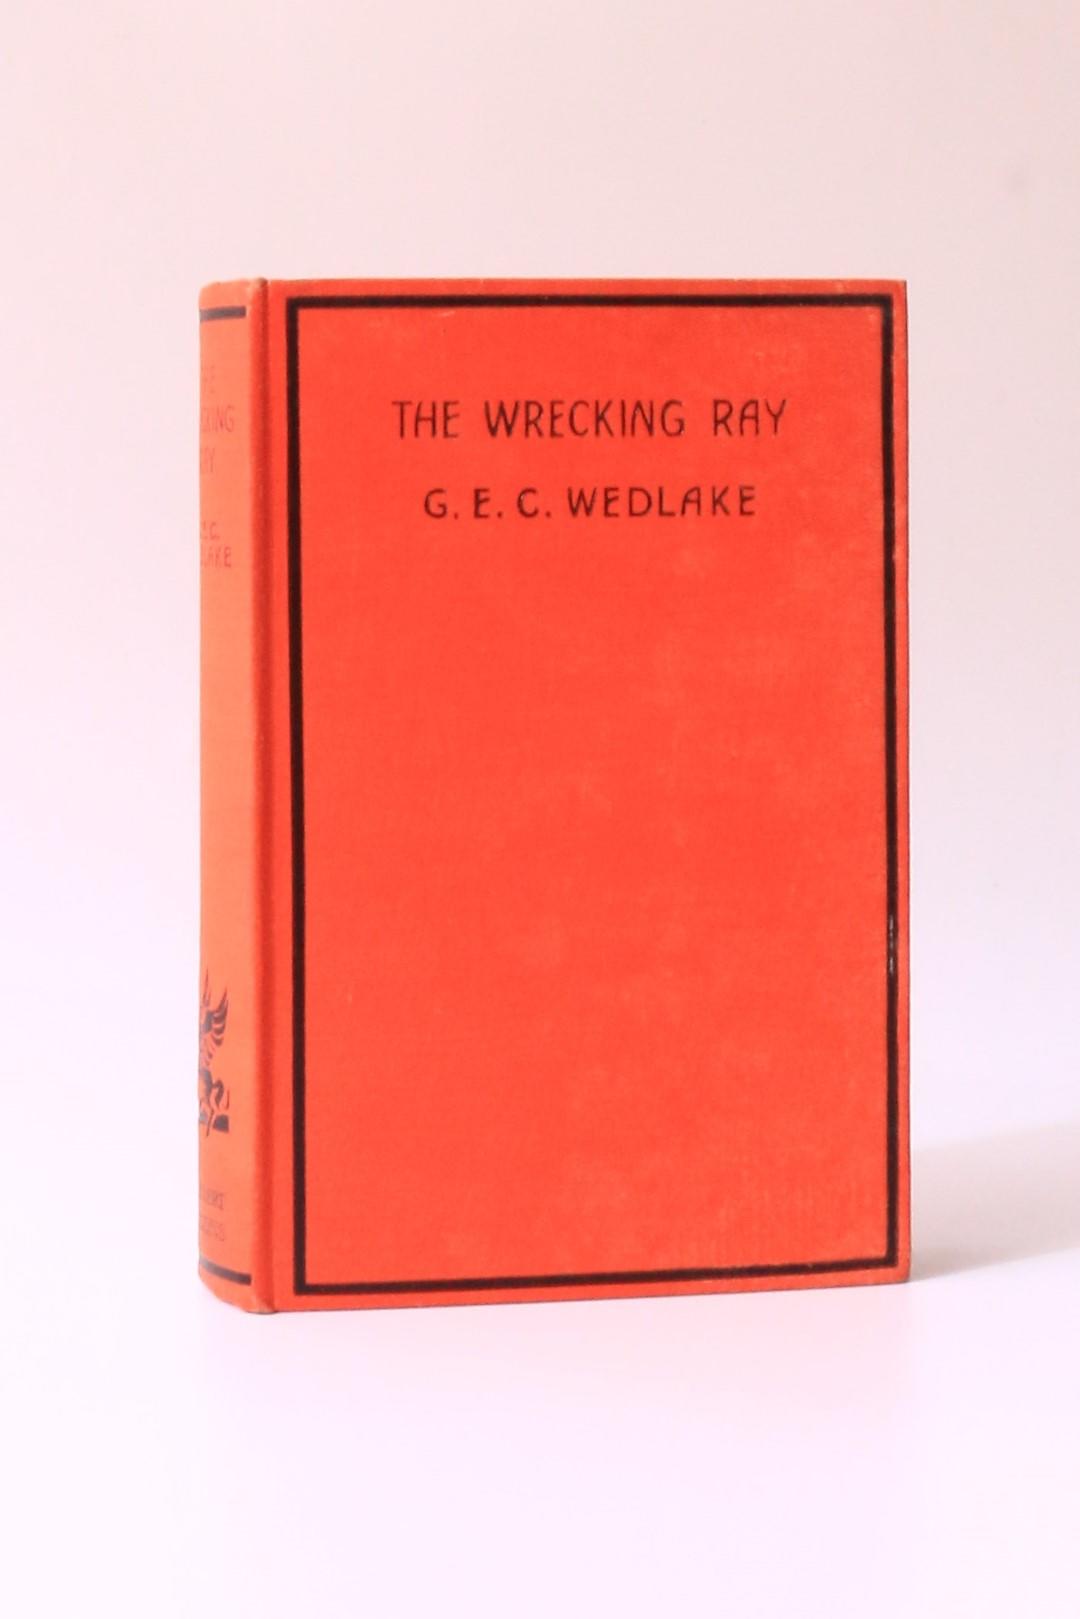 G.E.C. Wedlake - The Wrecking Ray - Herbert Jenkins, 1935, First Edition.